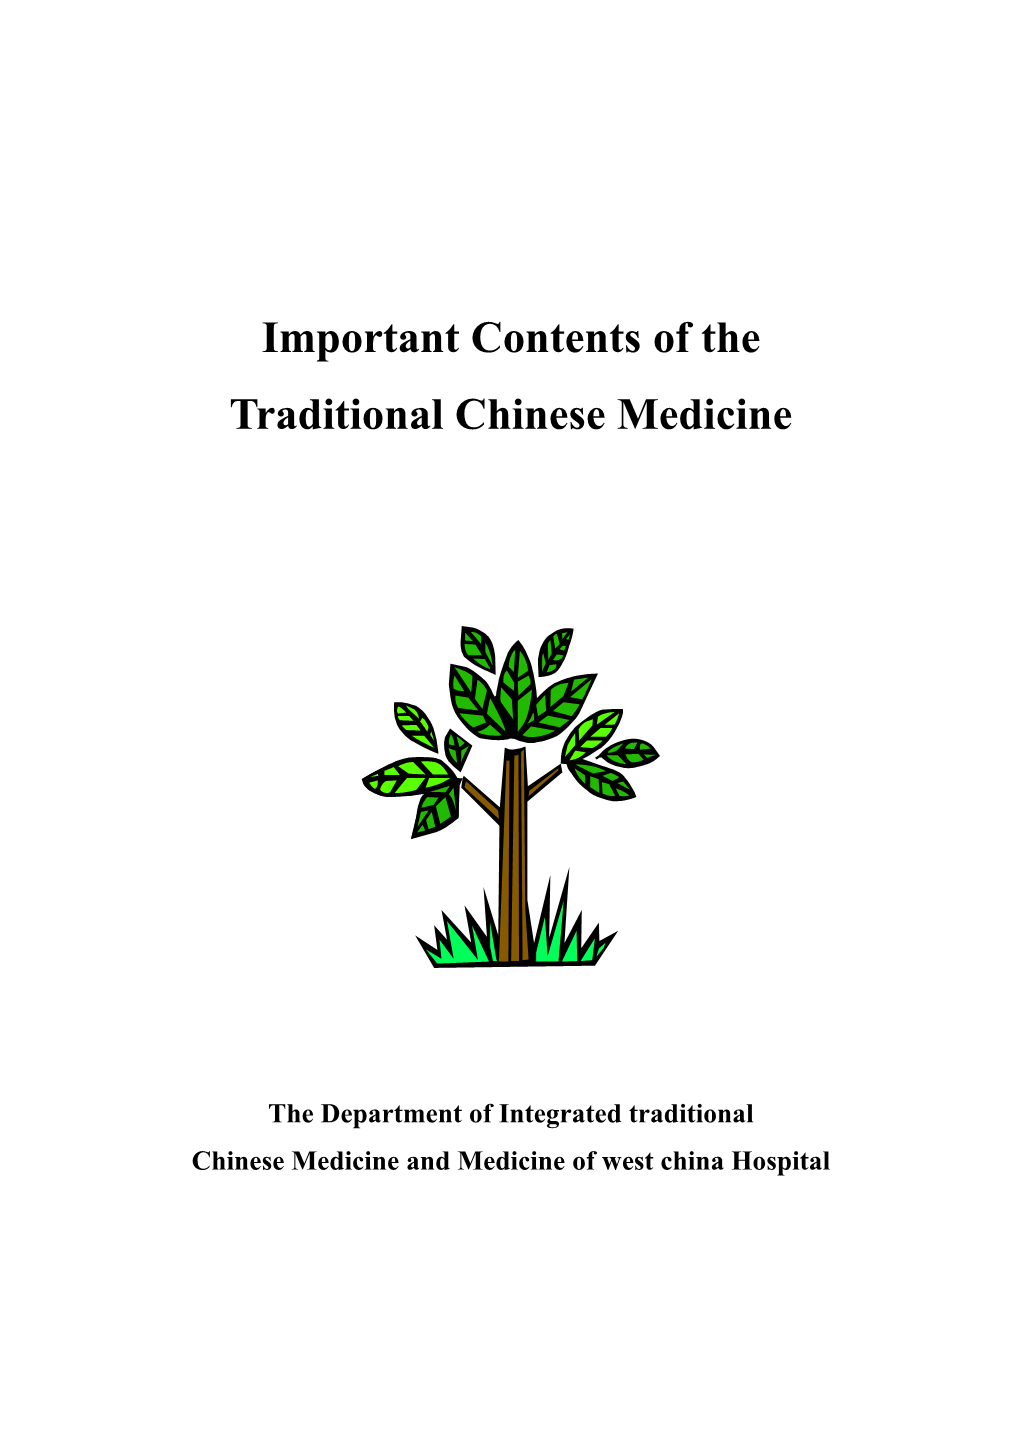 Important Contents of the Traditional Chinese Medicine